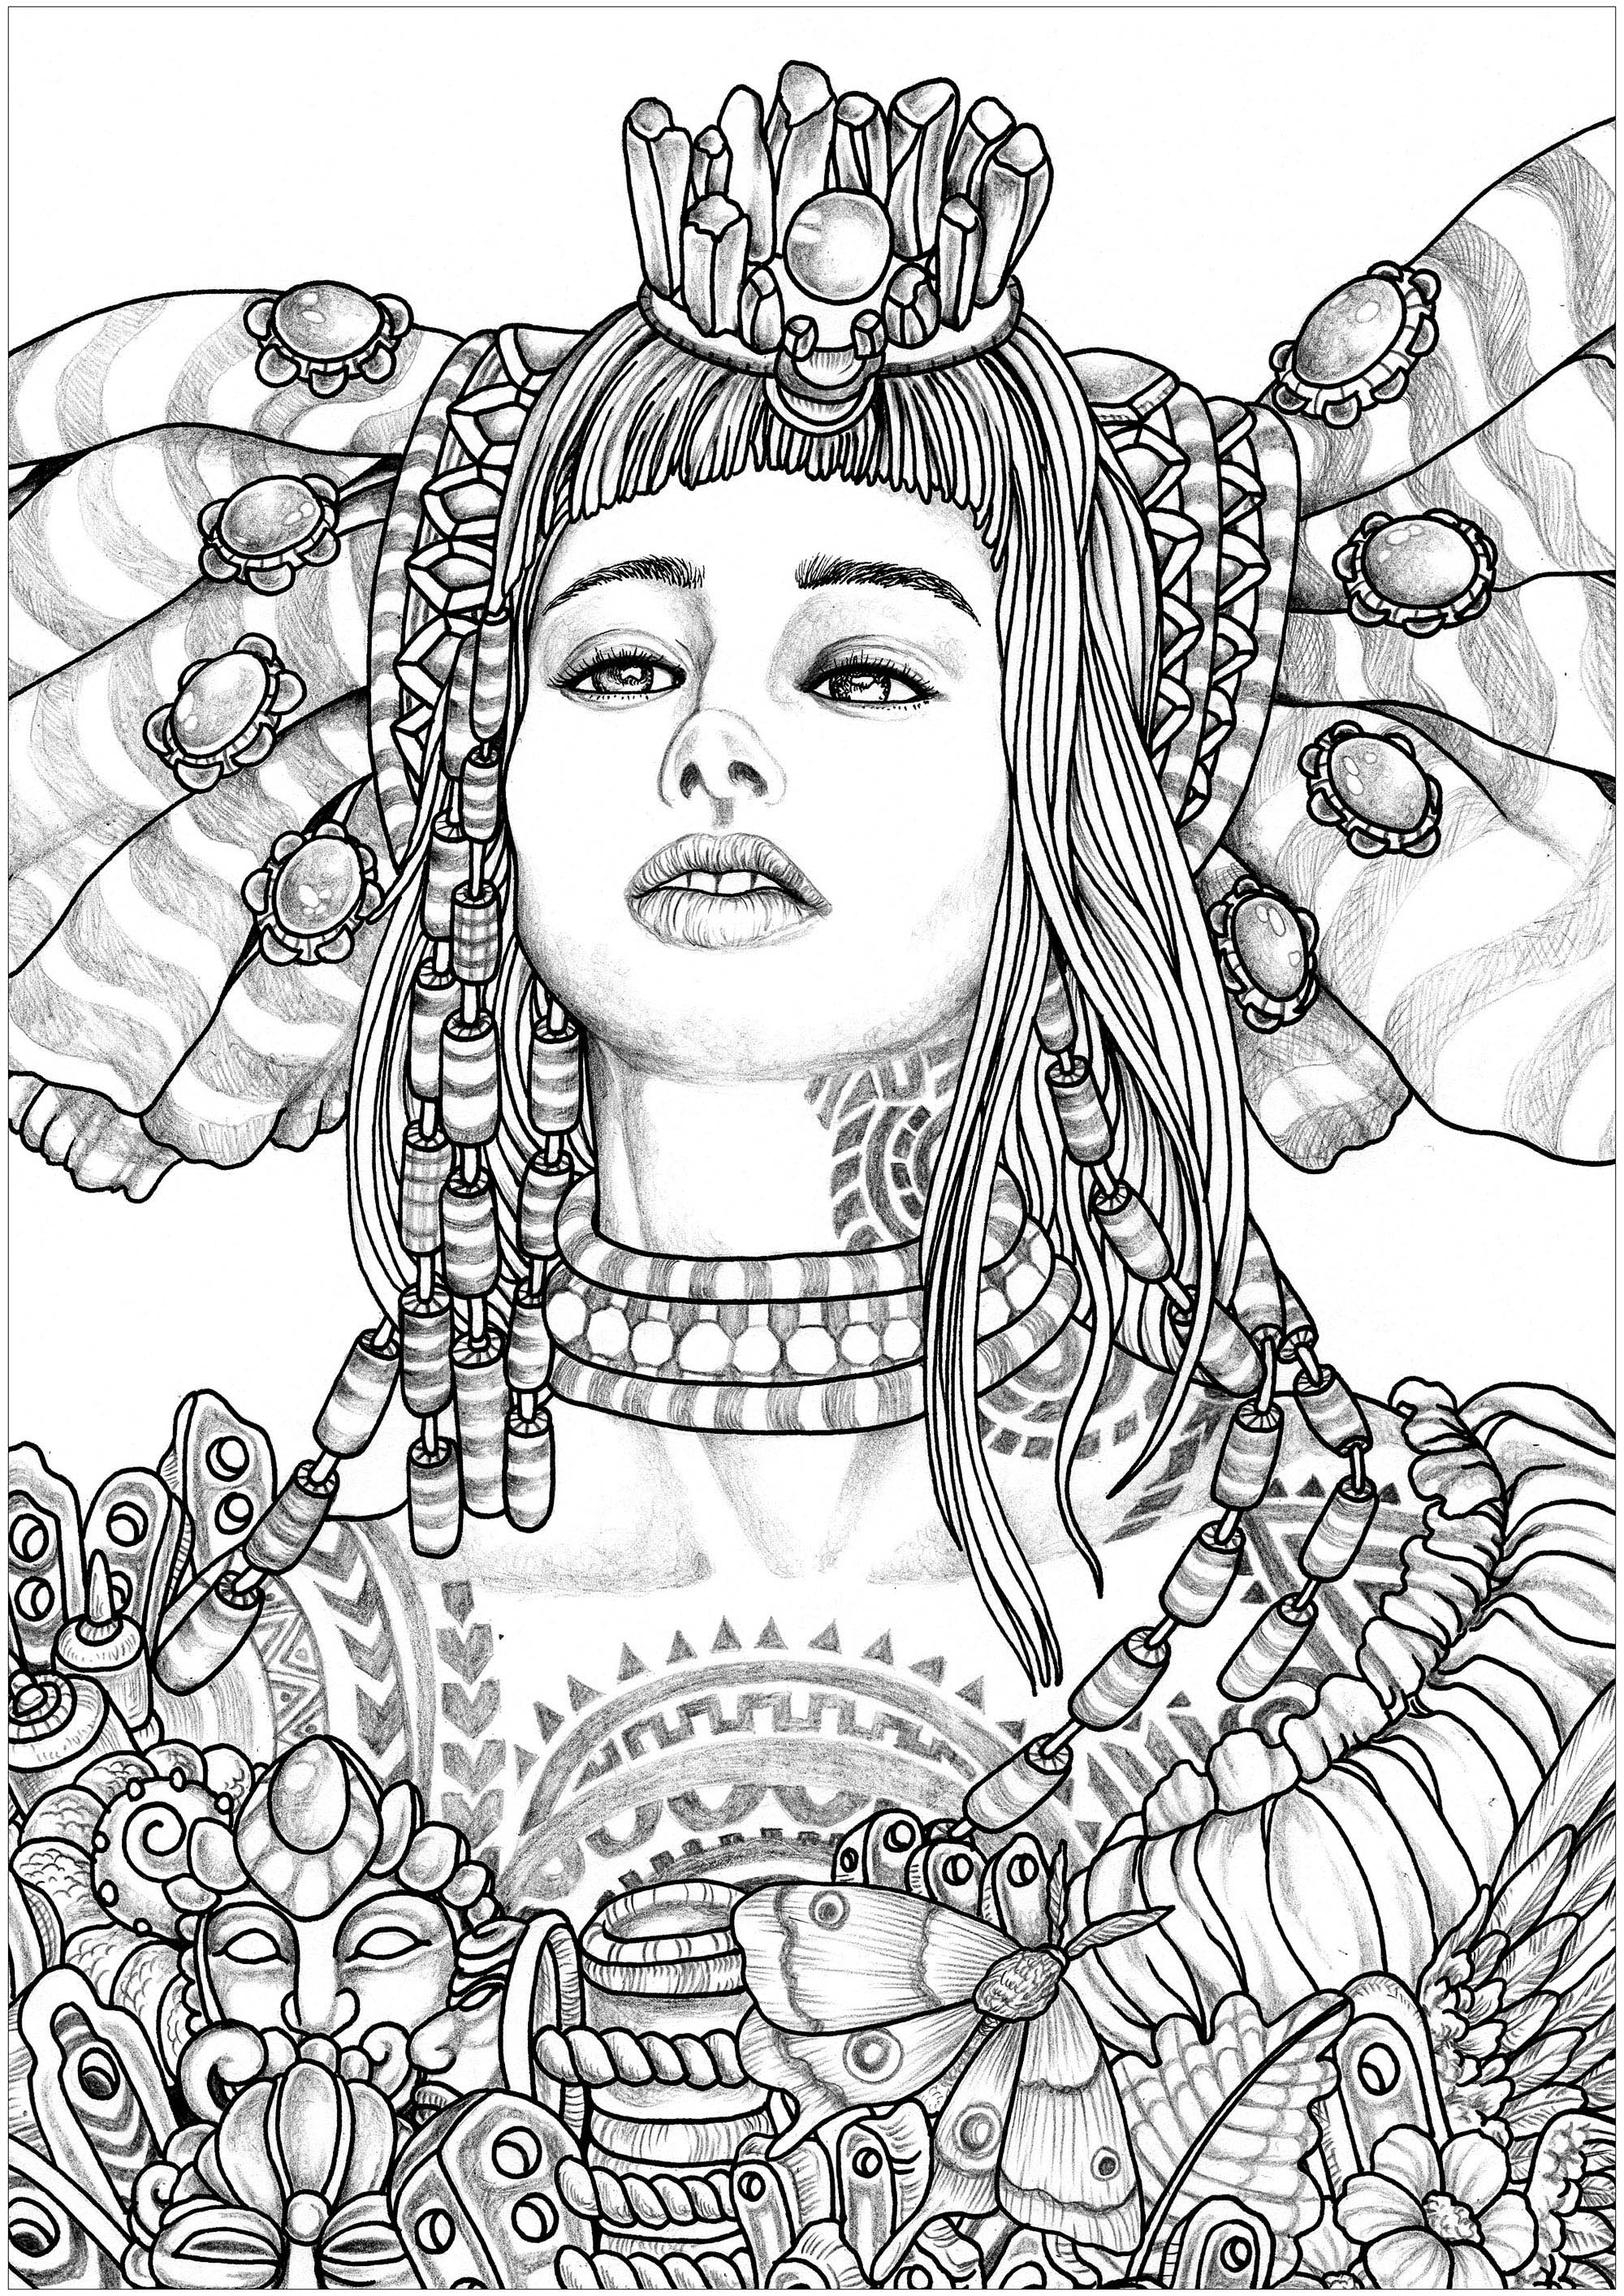 Imahination - 1. Imahinasyon woman: First character (Imahinasyon means Imagination in Tagalog: Tagalog is a regional language, spoken mainly in Southeast Asia and particularly in the Philippines), Artist : Mardel Rubio